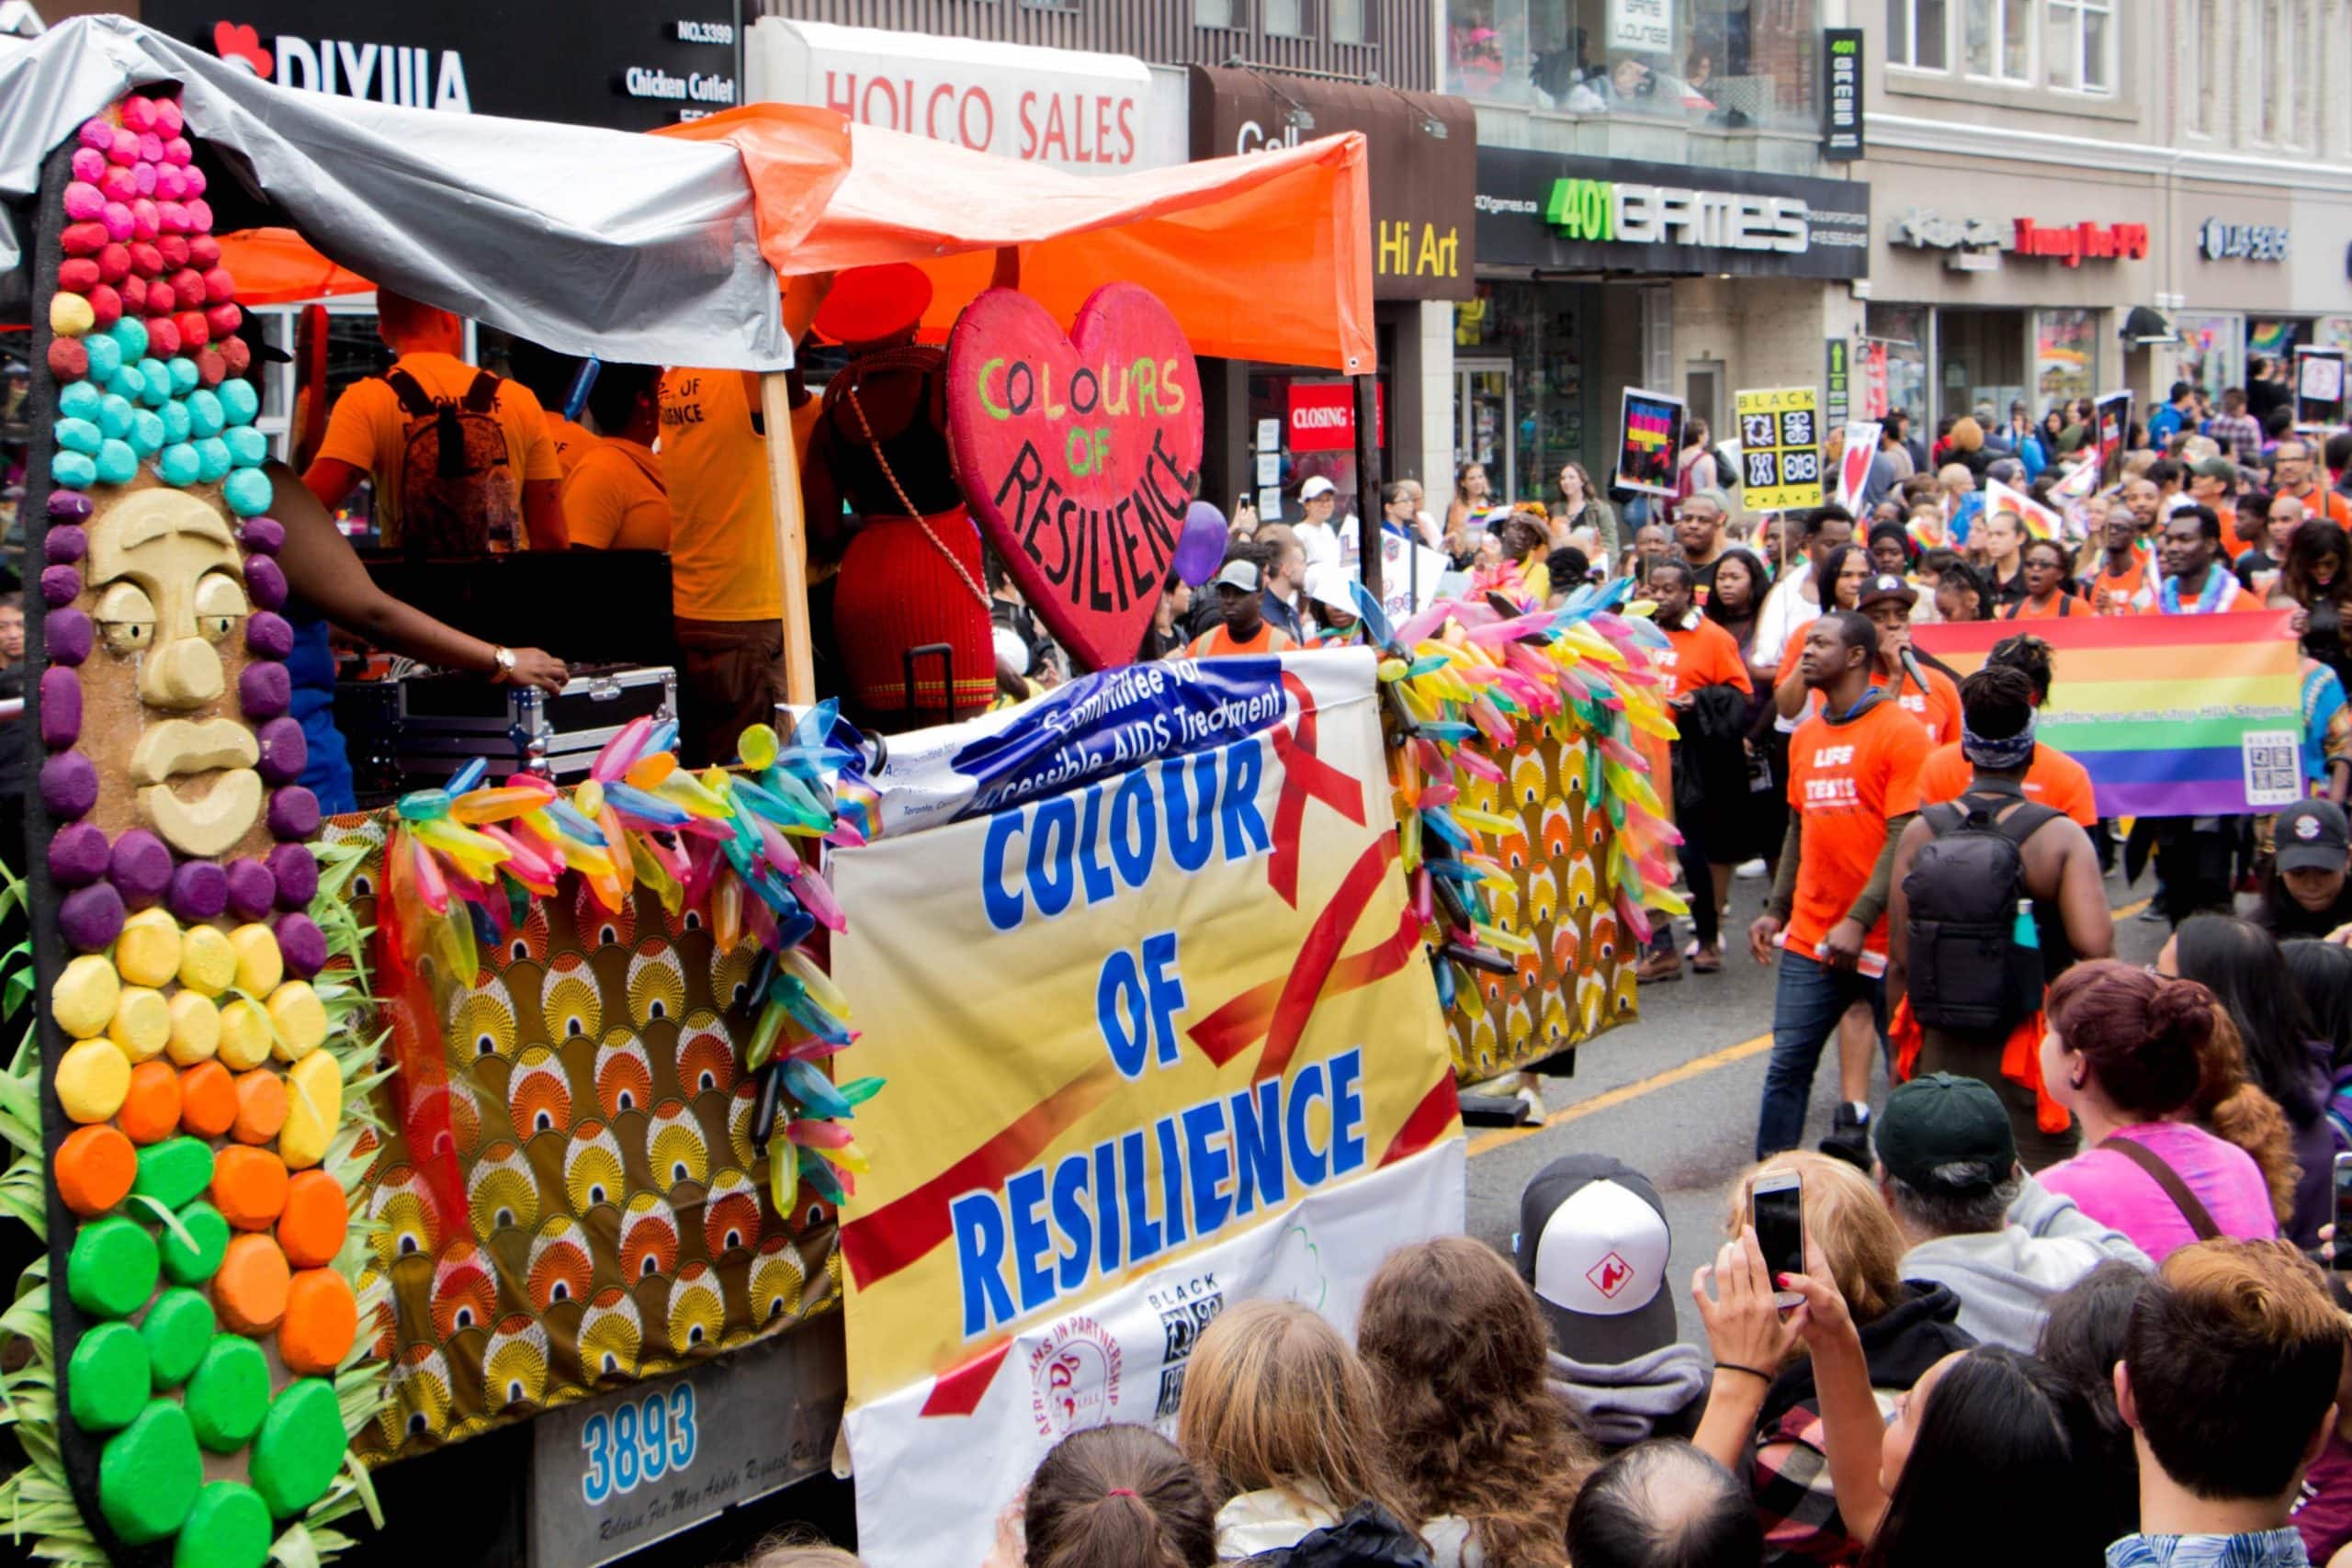 By Asha Collins, Parade Day; June 24 - This particular float depicts the theme of Pride 2018 of the celebration of 35 of HIV & AIDS activism. The banner across the float reads “Colour of Resistance”. The Red Ribbon for HIV and AIDS awareness in the background of the banner.